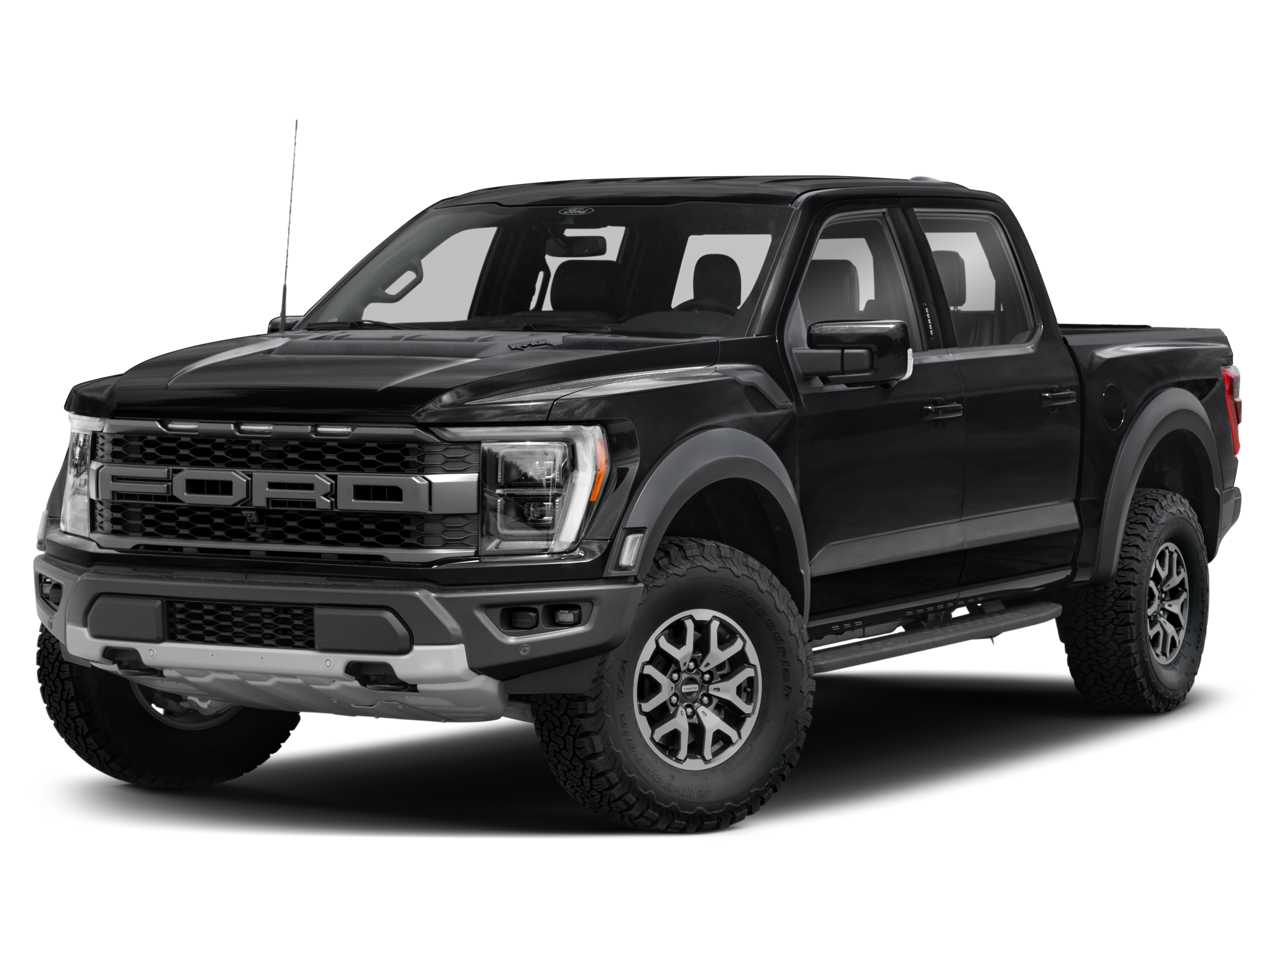 2021 Ford F-150 Raptor 37 Performance Pkg. | Pano Roof | Sync 4